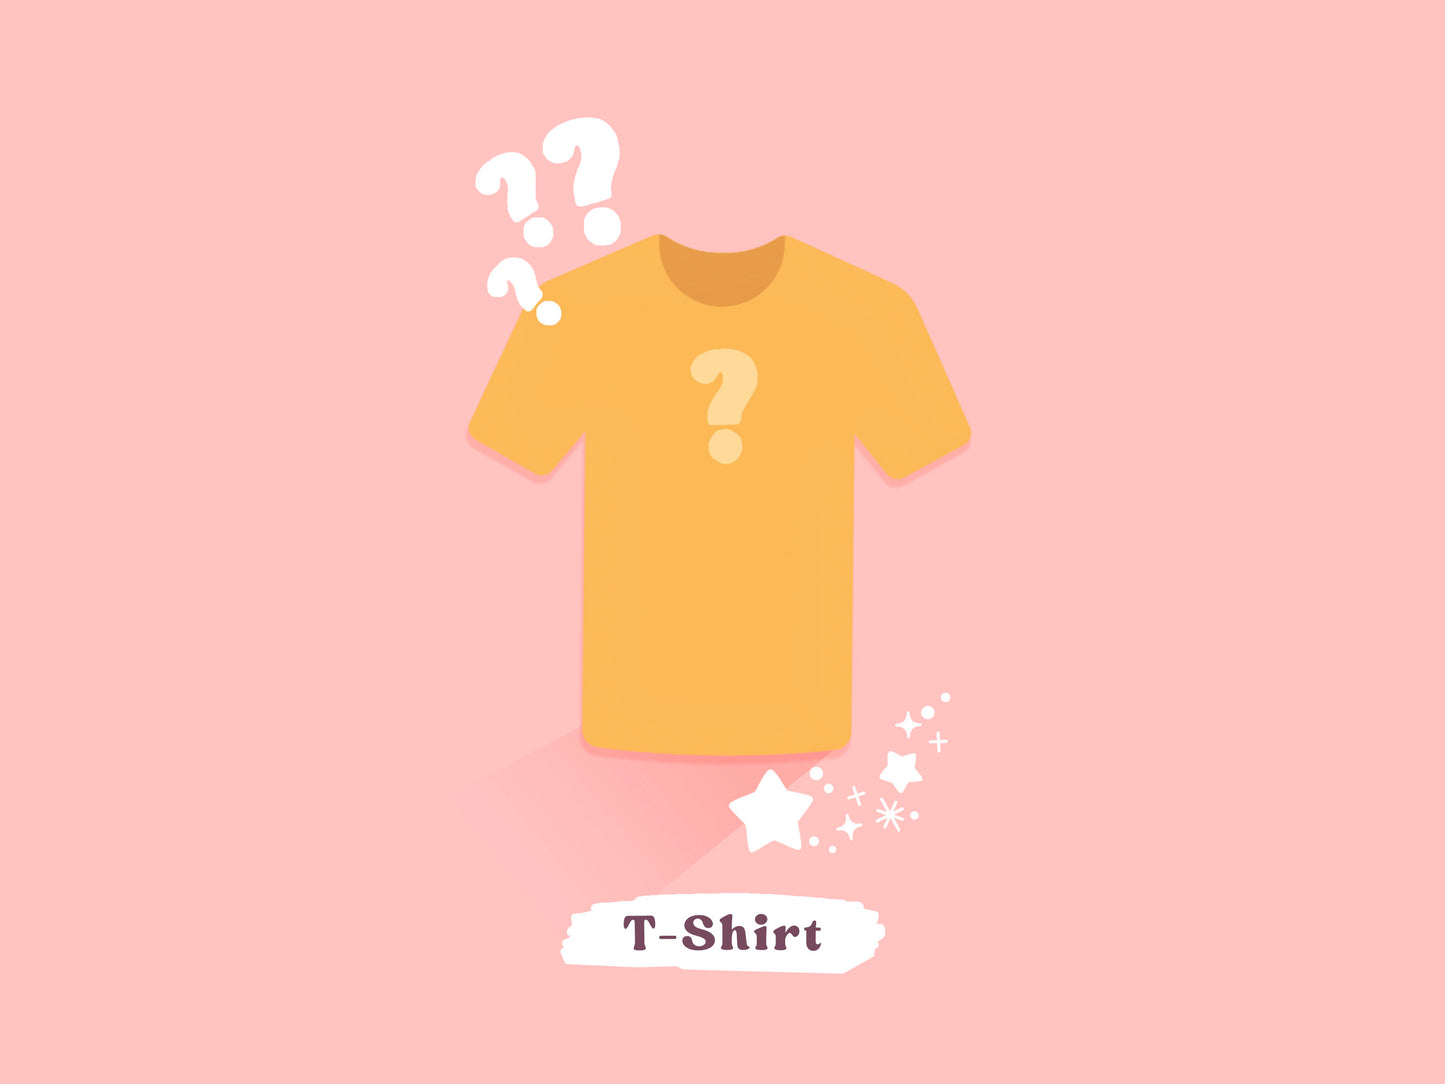 A yellow t-shirt illustration surrounded by question marks and the text Tshirt, mystery clothing random meme themed apparel